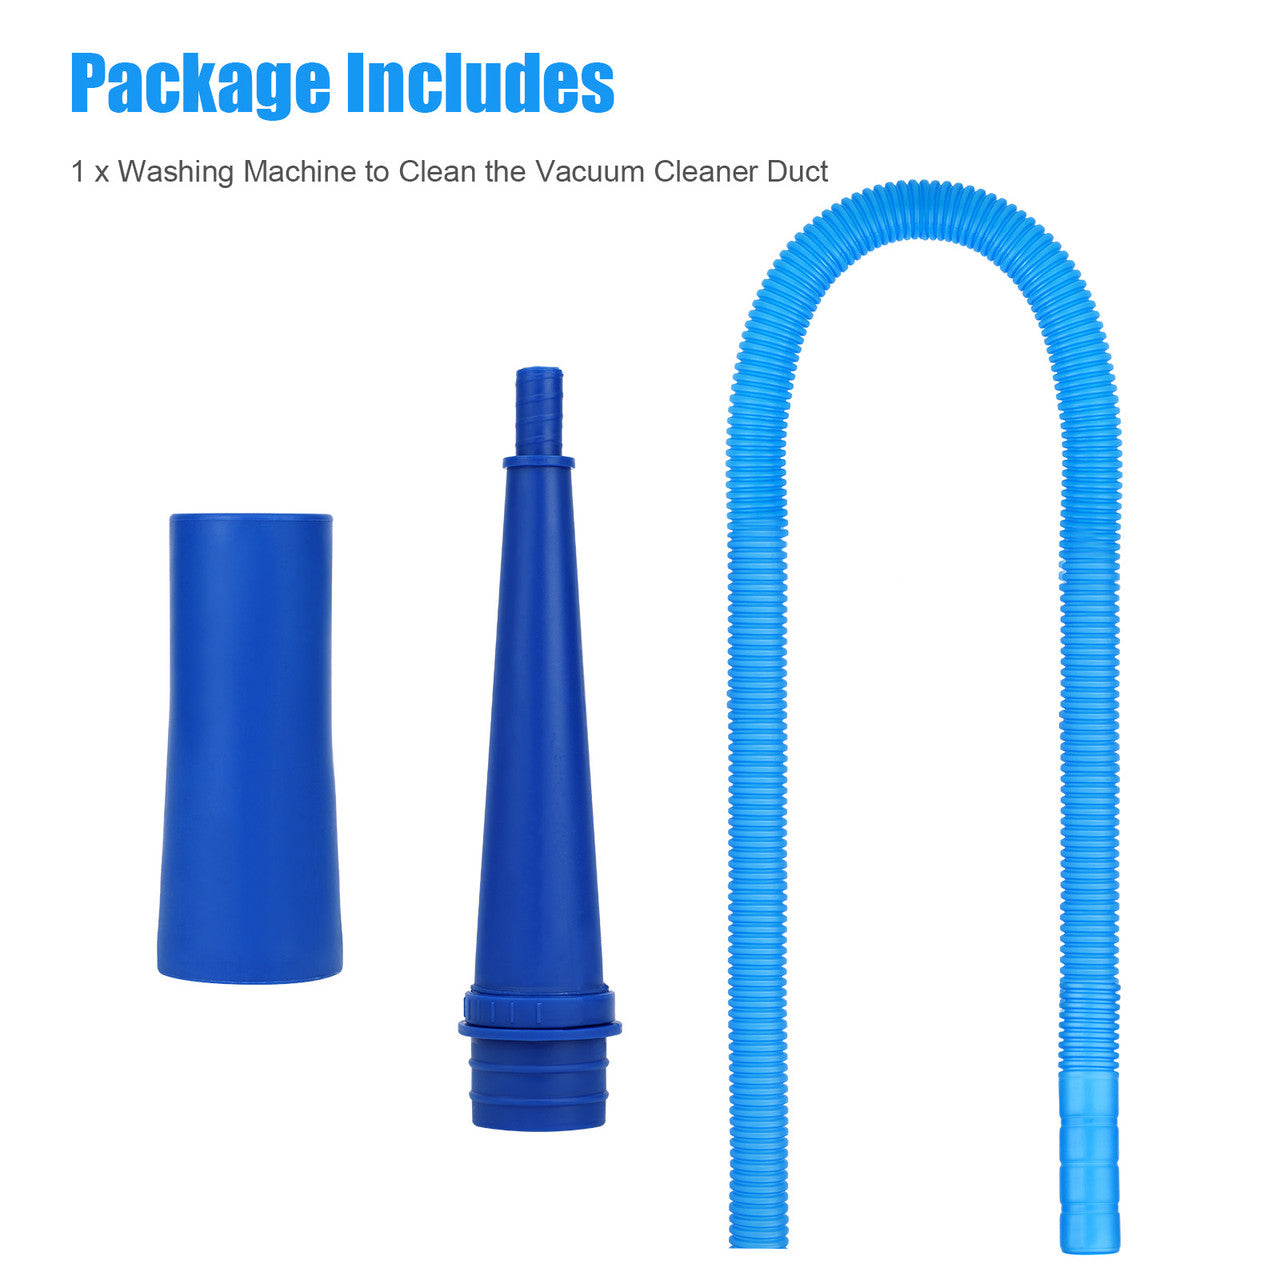 Dryer Lint Vacuum Cleaner Kit - Flexible Dryer Vent Cleaner Kit Attaches Easily to The Vacuum Hose of Most Vacuums - Also Cleans Your Washer, Refrigerator, and Other Home Appliances ( Blue )